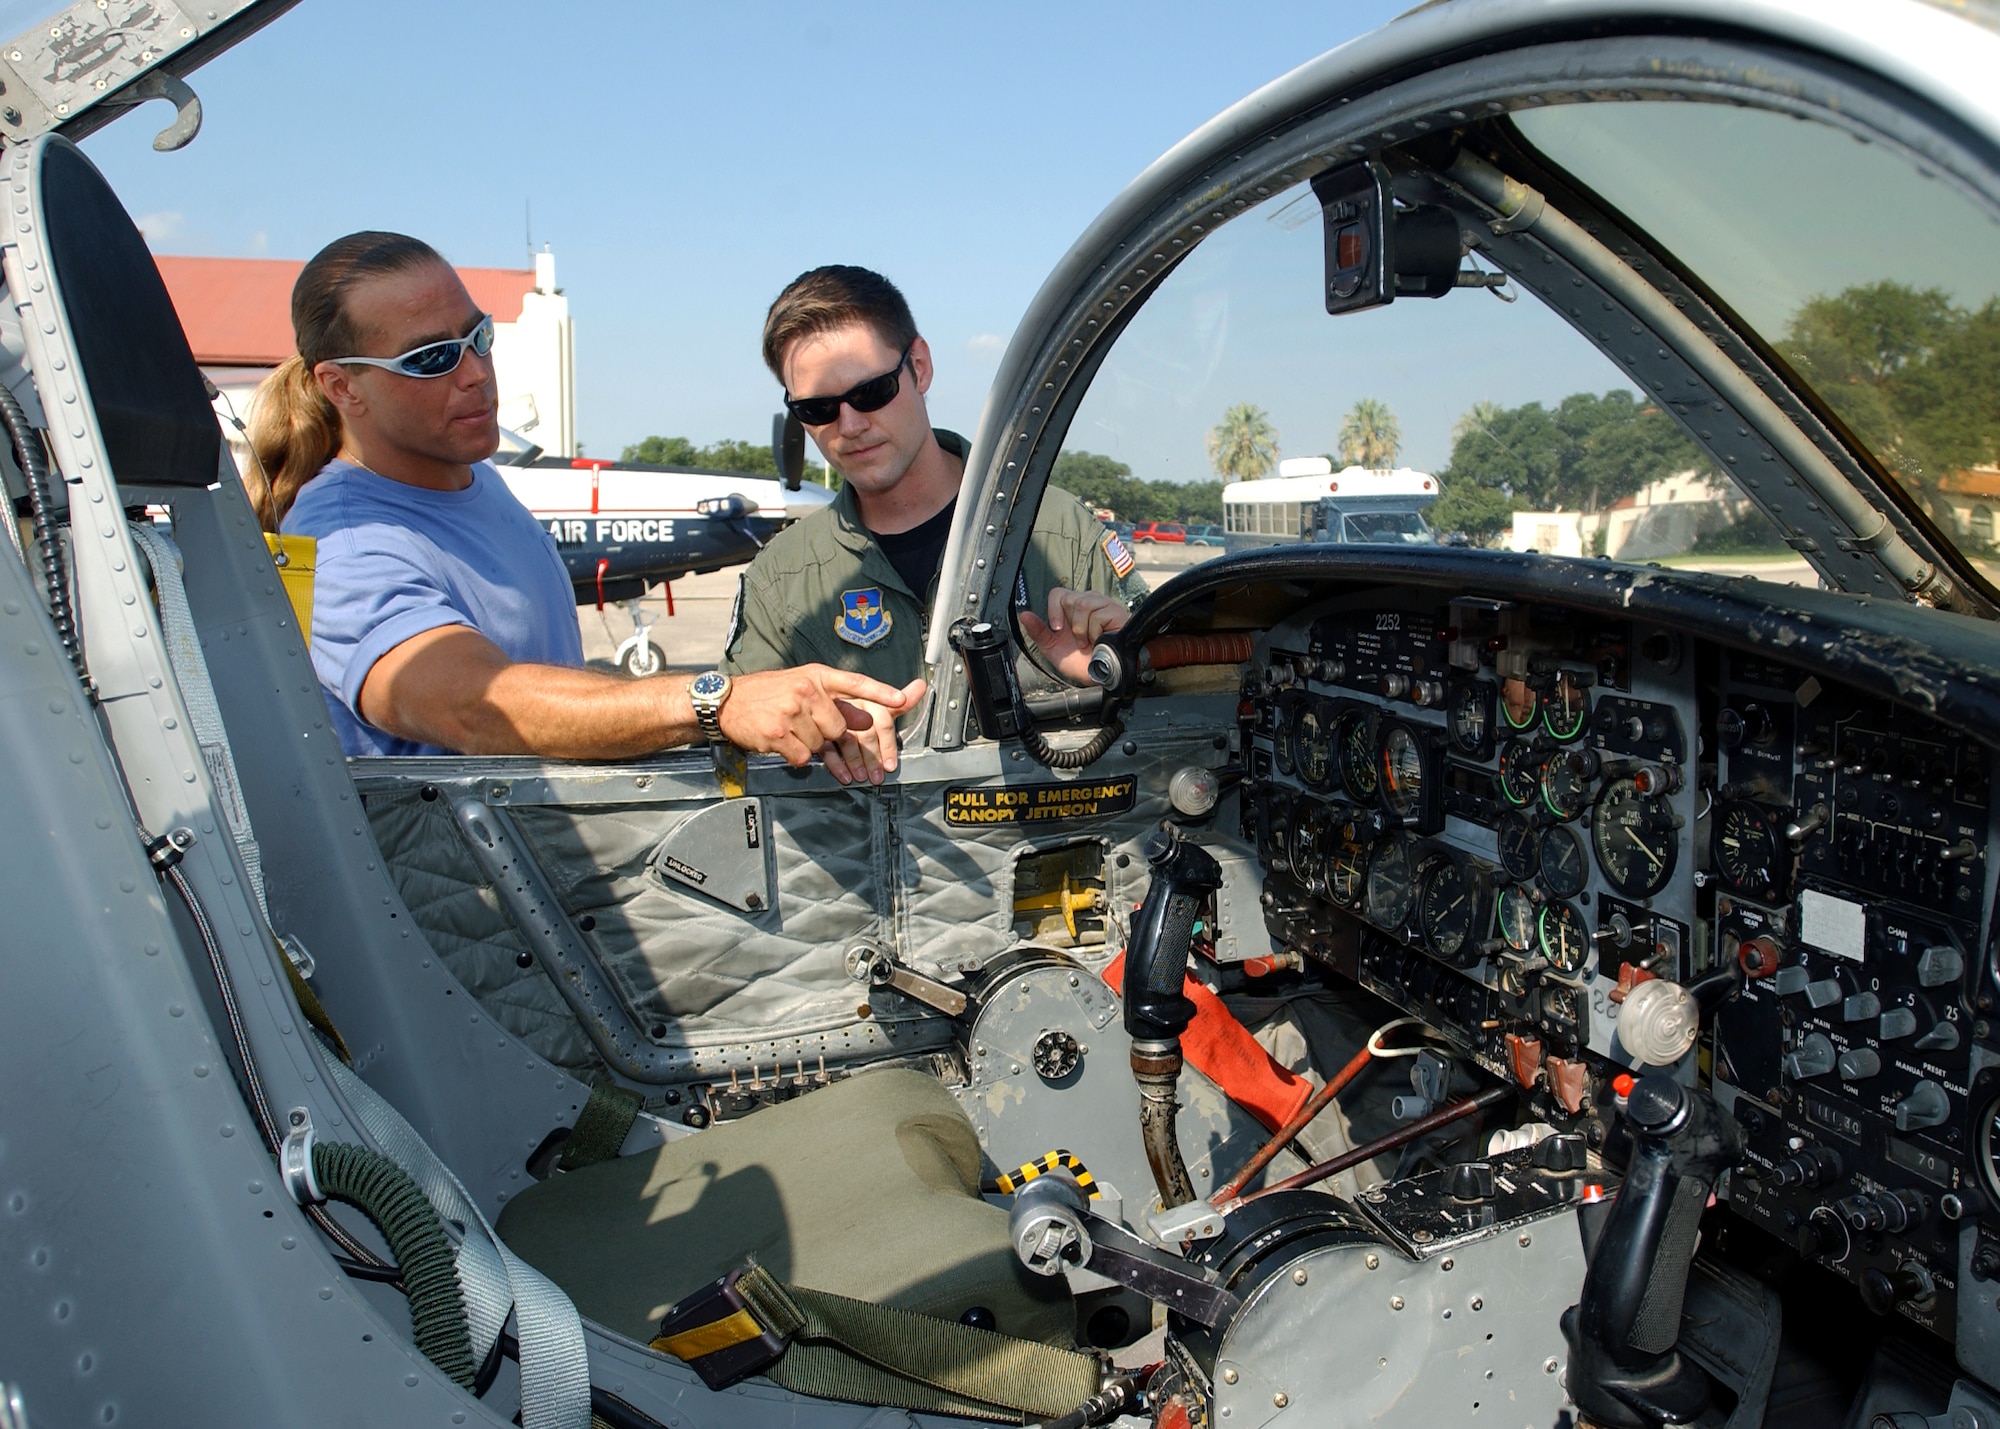 RANDOLPH AIR FORCE BASE, Texas (AFPN) -- Capt. Matt Gehrke shows professional wrestler Shawn Michaels the cockpit of a T-37 Tweet.  The wrestler, who spent a portion of his childhood here, toured the base Aug. 4.  Captain Gehrke is assigned to the 559th Flying Training Squadron.  (U.S. Air Force photo by Master Sgt. Lee Roberts)